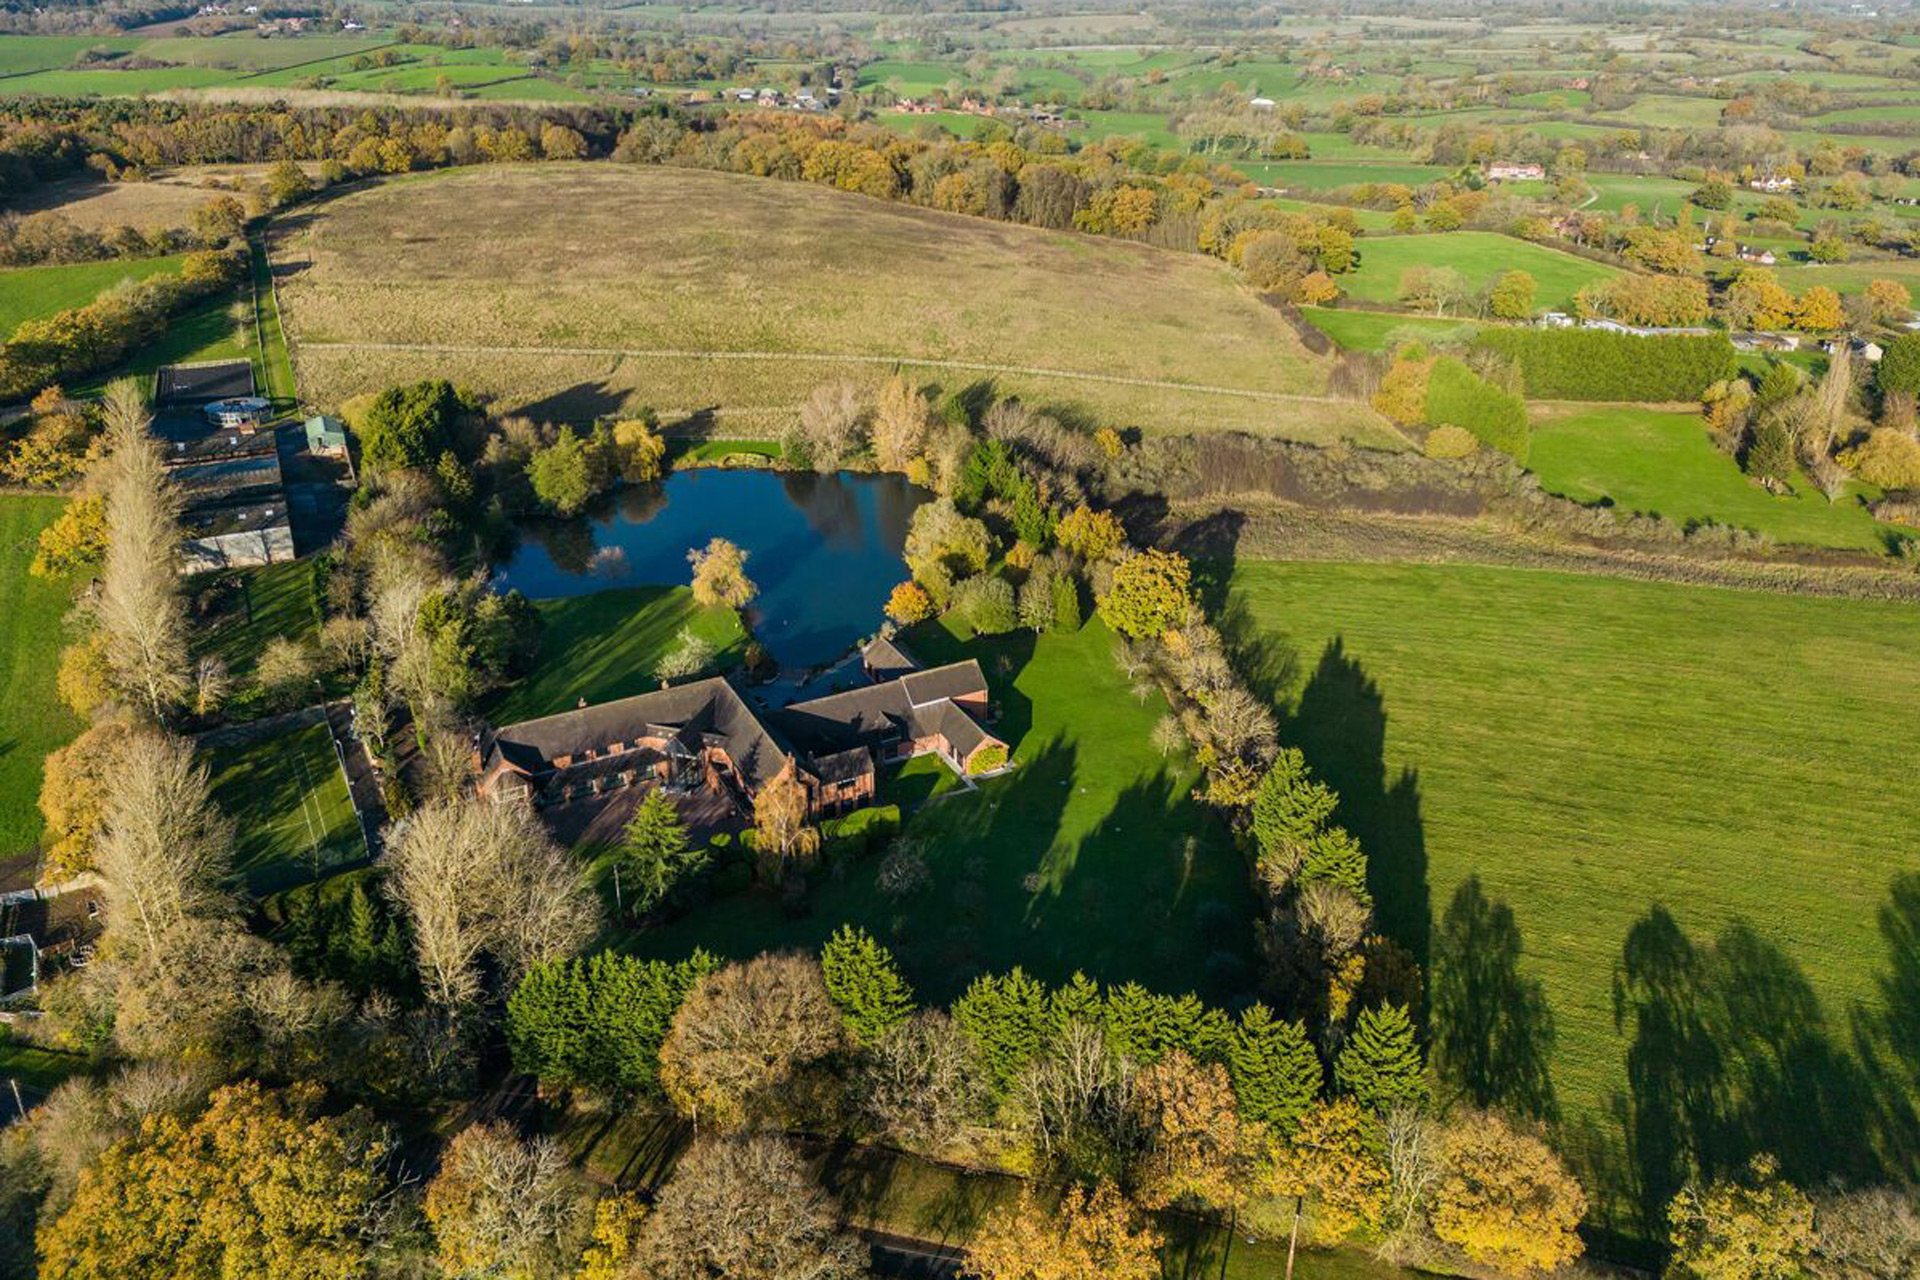 Aerial view of a large farmhouse with stables and a lake.